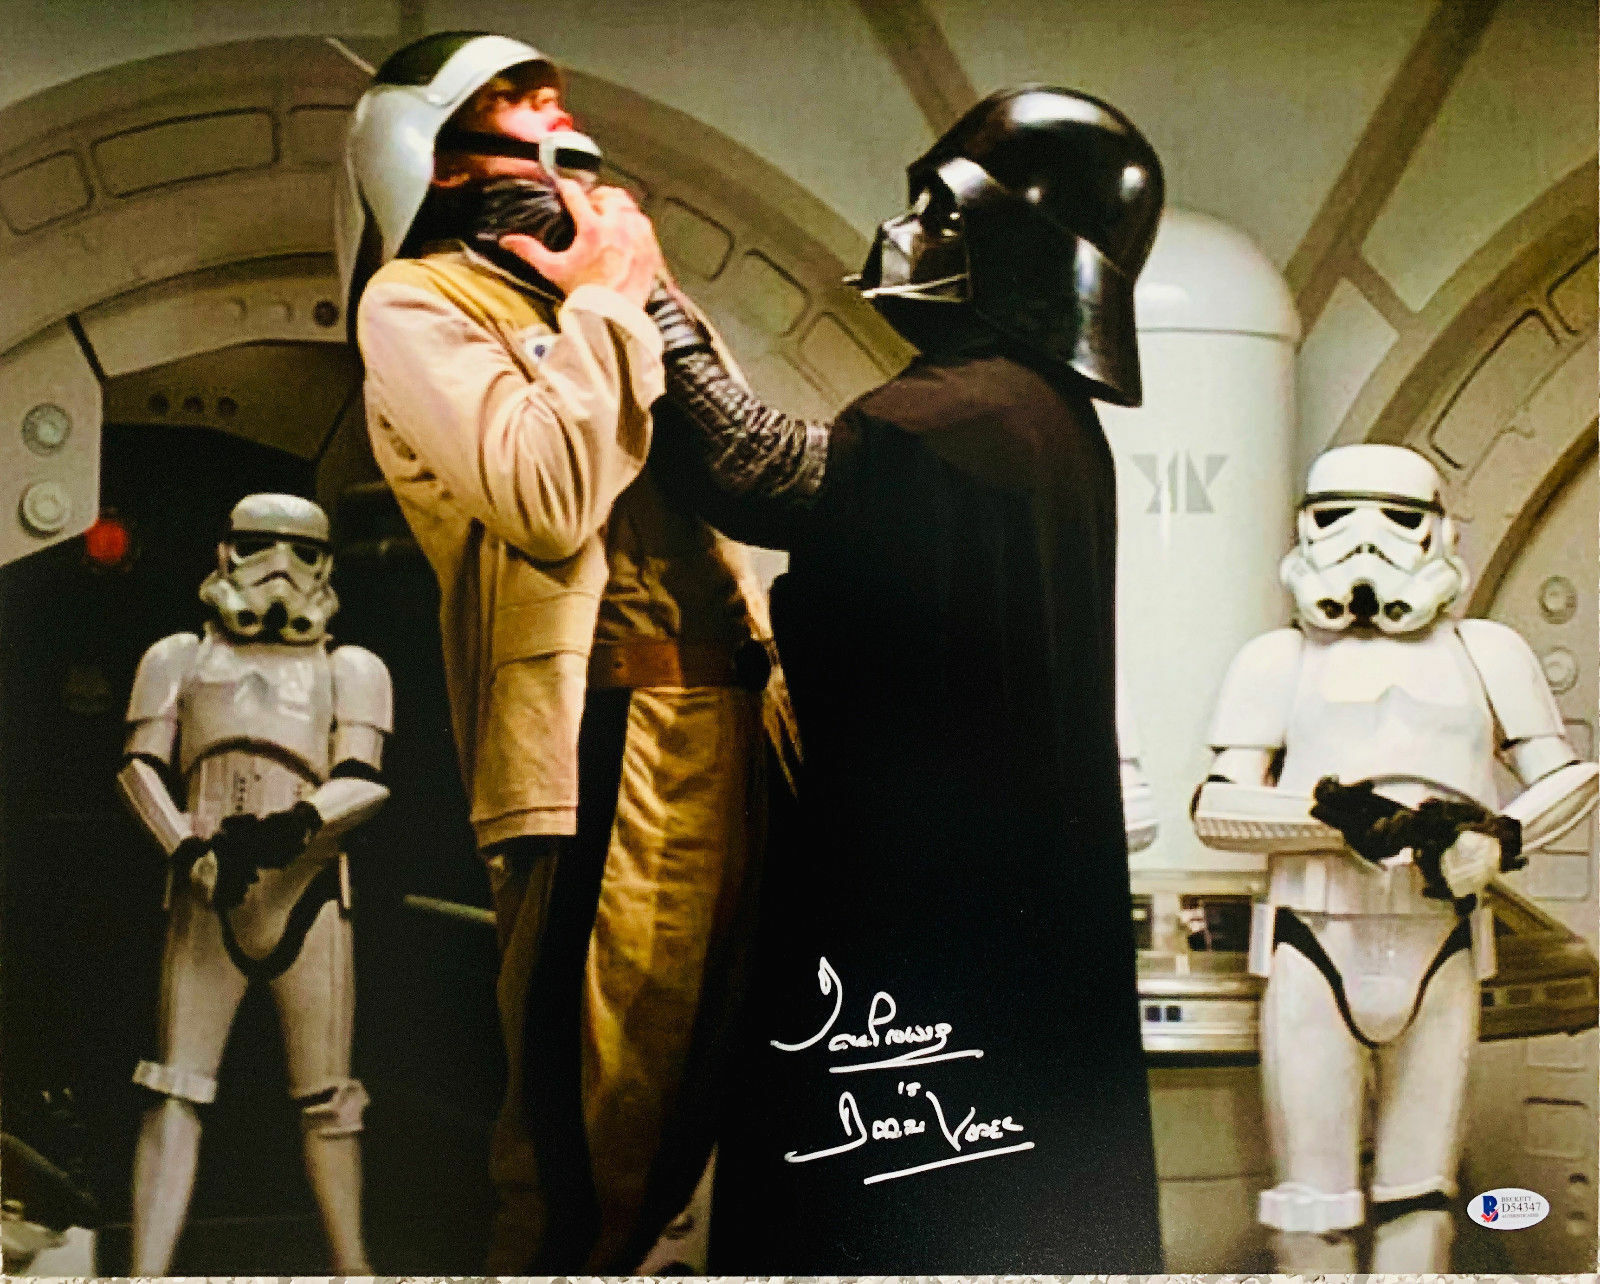 Dave Prowse * Authentic Signed Star Wars Darth Vader 16x20 Photo Poster painting - Beckett BAS 8